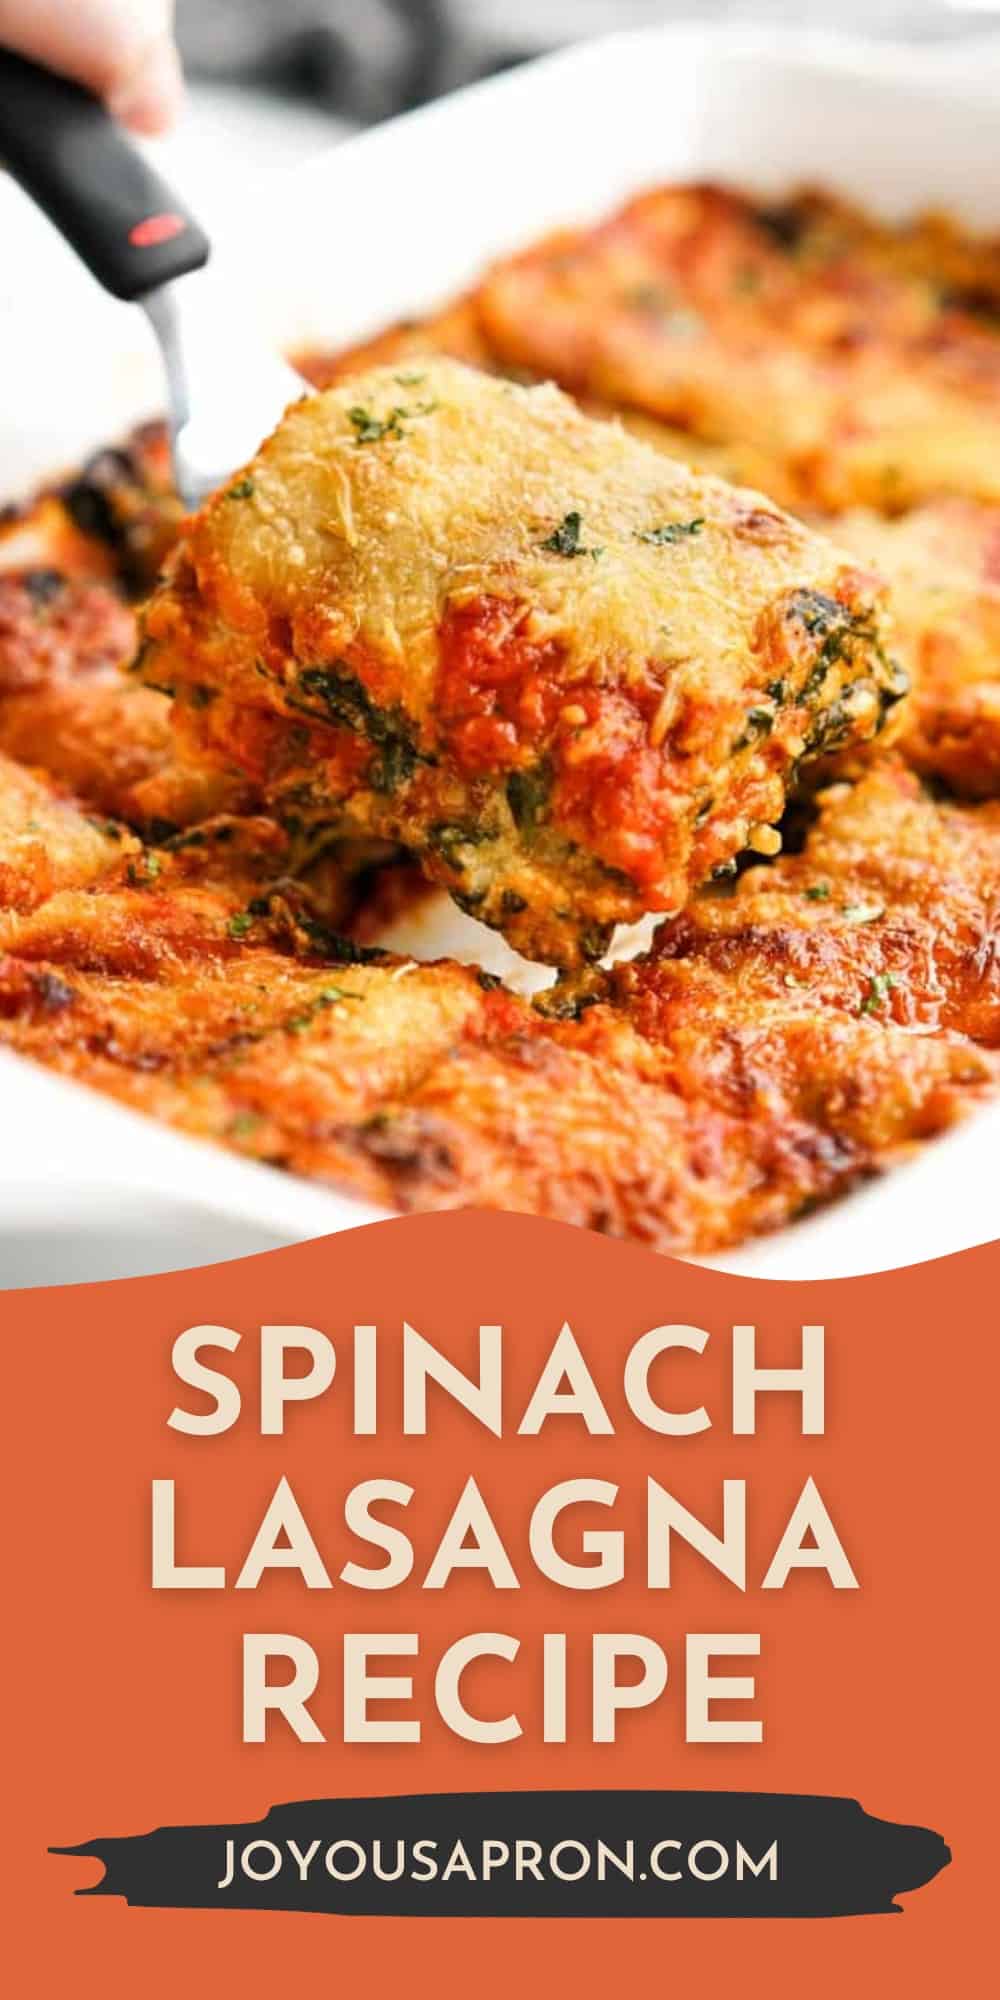 Spinach Lasagna - easy lasagna featuring layers of spinach, ricotta and parmesan cheese mixture, red marinara sauce and mozzarella cheese. Makes for a tasty weeknight dinner, meal prep and make ahead meal! via @joyousapron